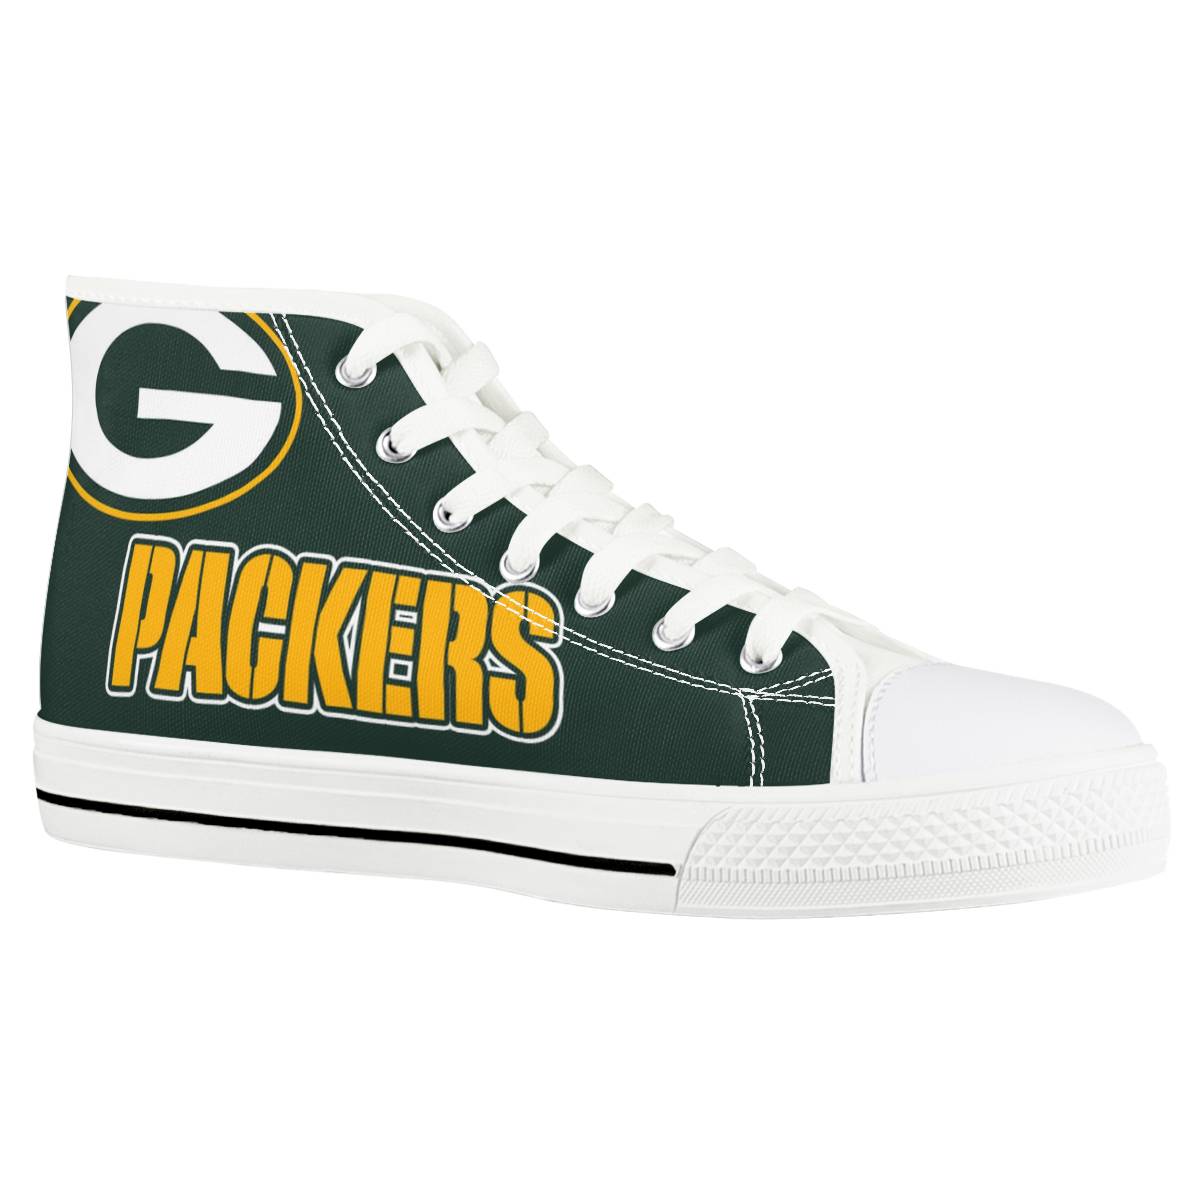 Men's Green Bay Packers High Top Canvas Sneakers 008